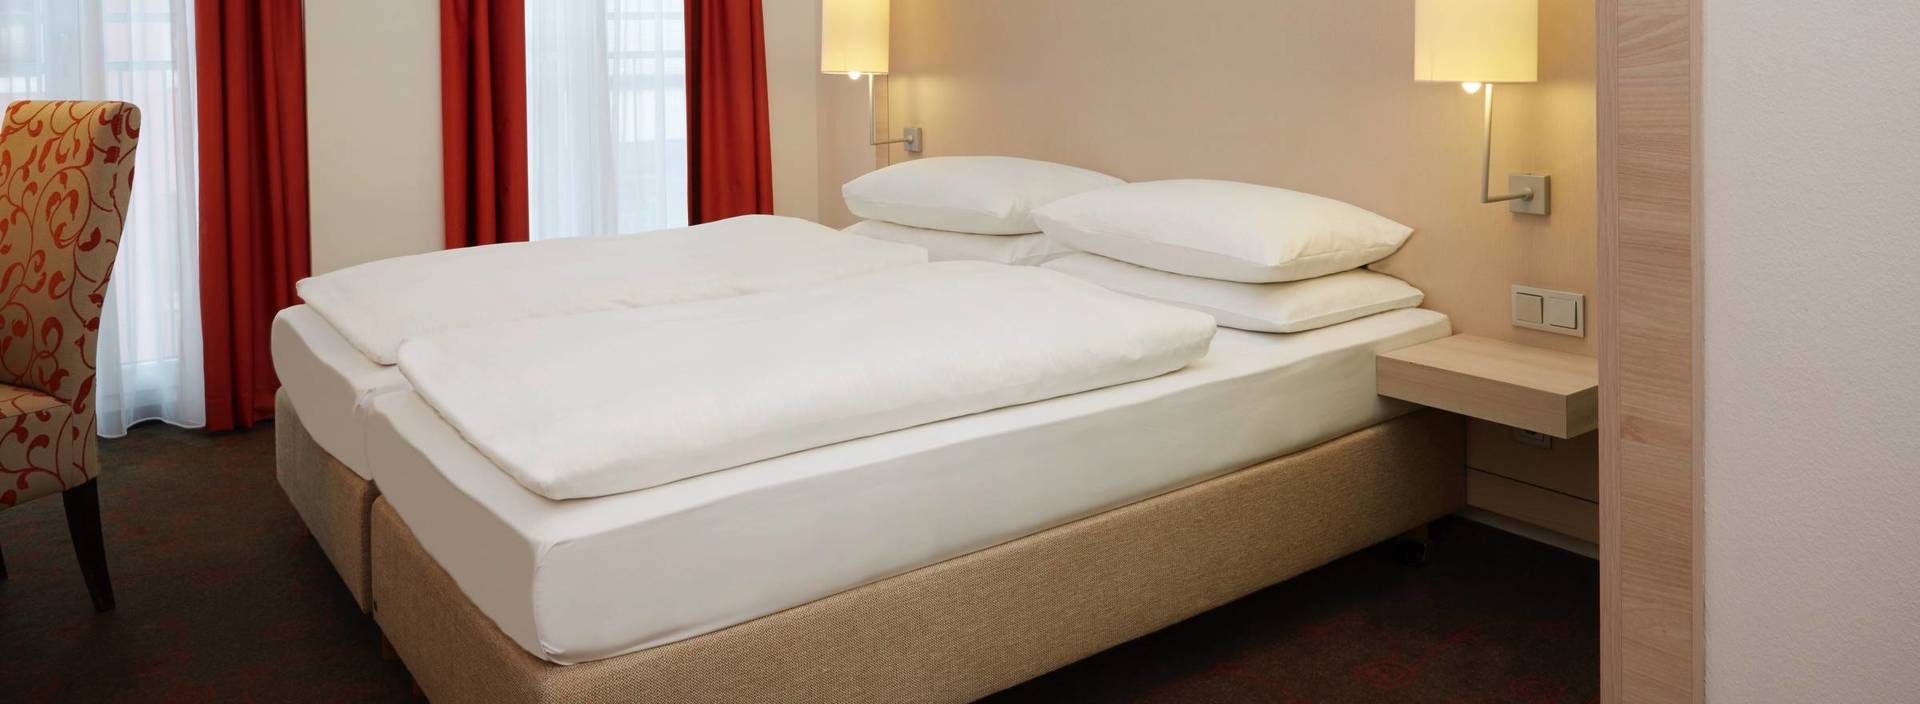 Comfort room at the H+ Hotel München - Official website